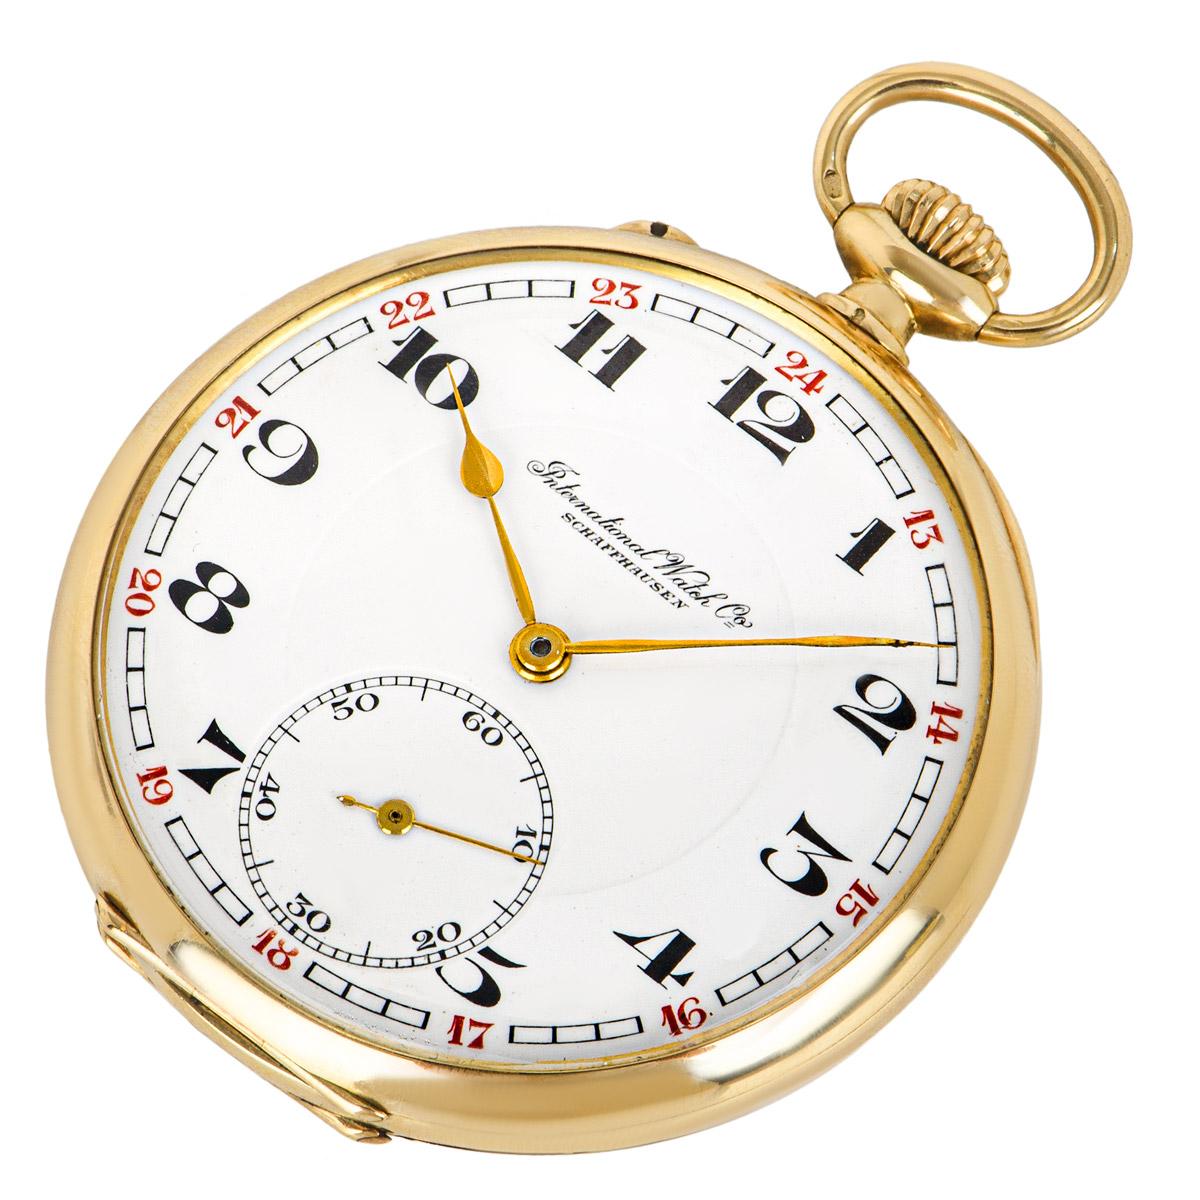 An International Watch Company 14ct yellow gold, keyless lever open face pocket watch, C1920s with it's original presentation box.

Dial: A Beautiful White Enamel Dial in perfect condition Arabic numerals with Red twenty four hour outer track